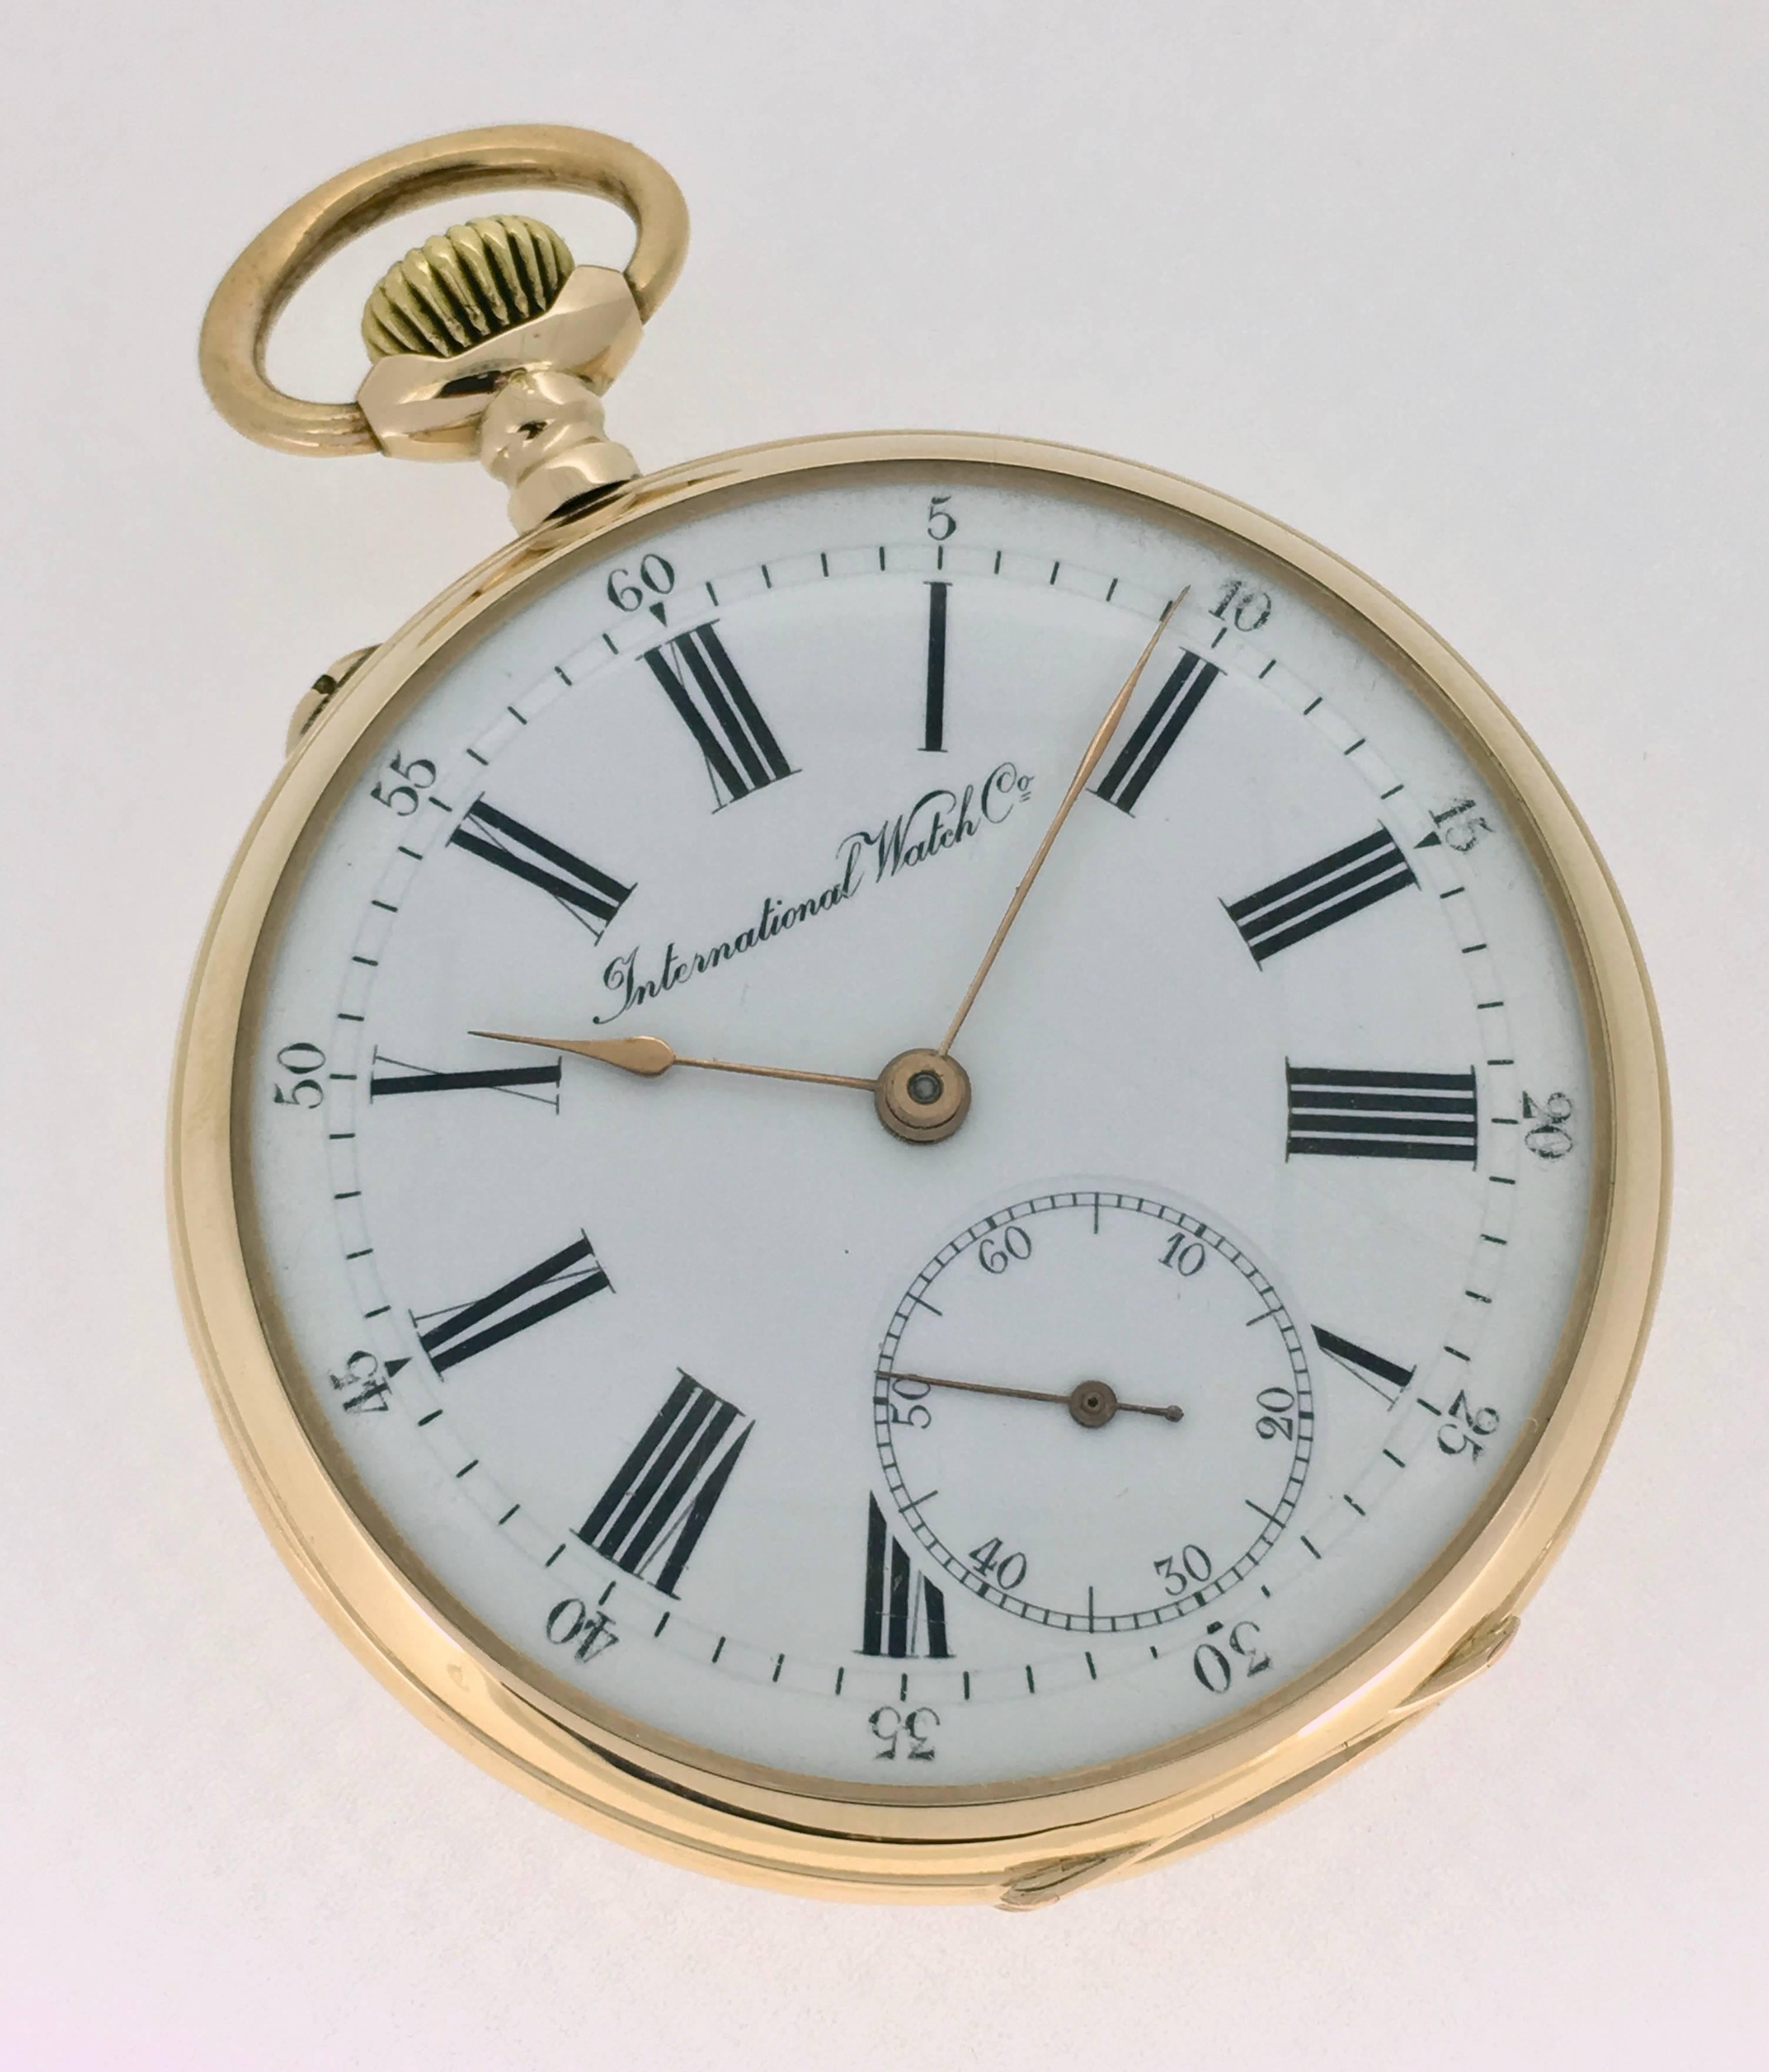 Men's IWC pink gold Pocket Watch with Gold Chain, circa 1910 For Sale